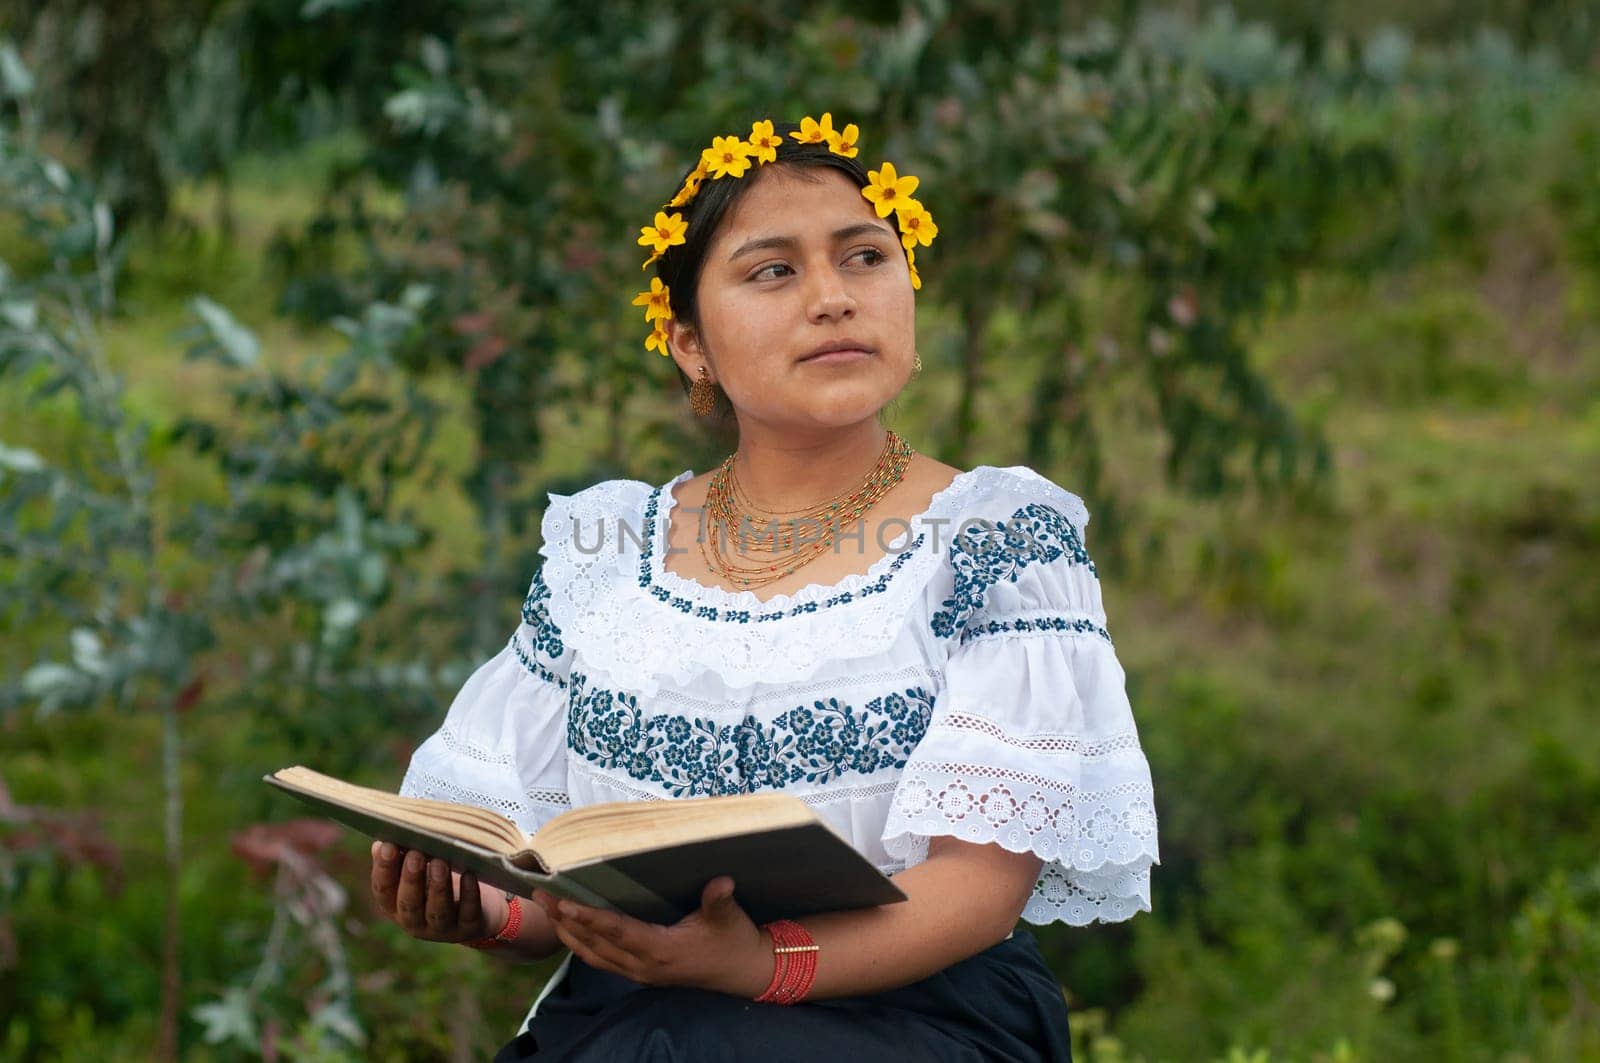 Literary Fiesta: A Woman in Vibrant Mexican Attire Immersed in a World of Words by Raulmartin